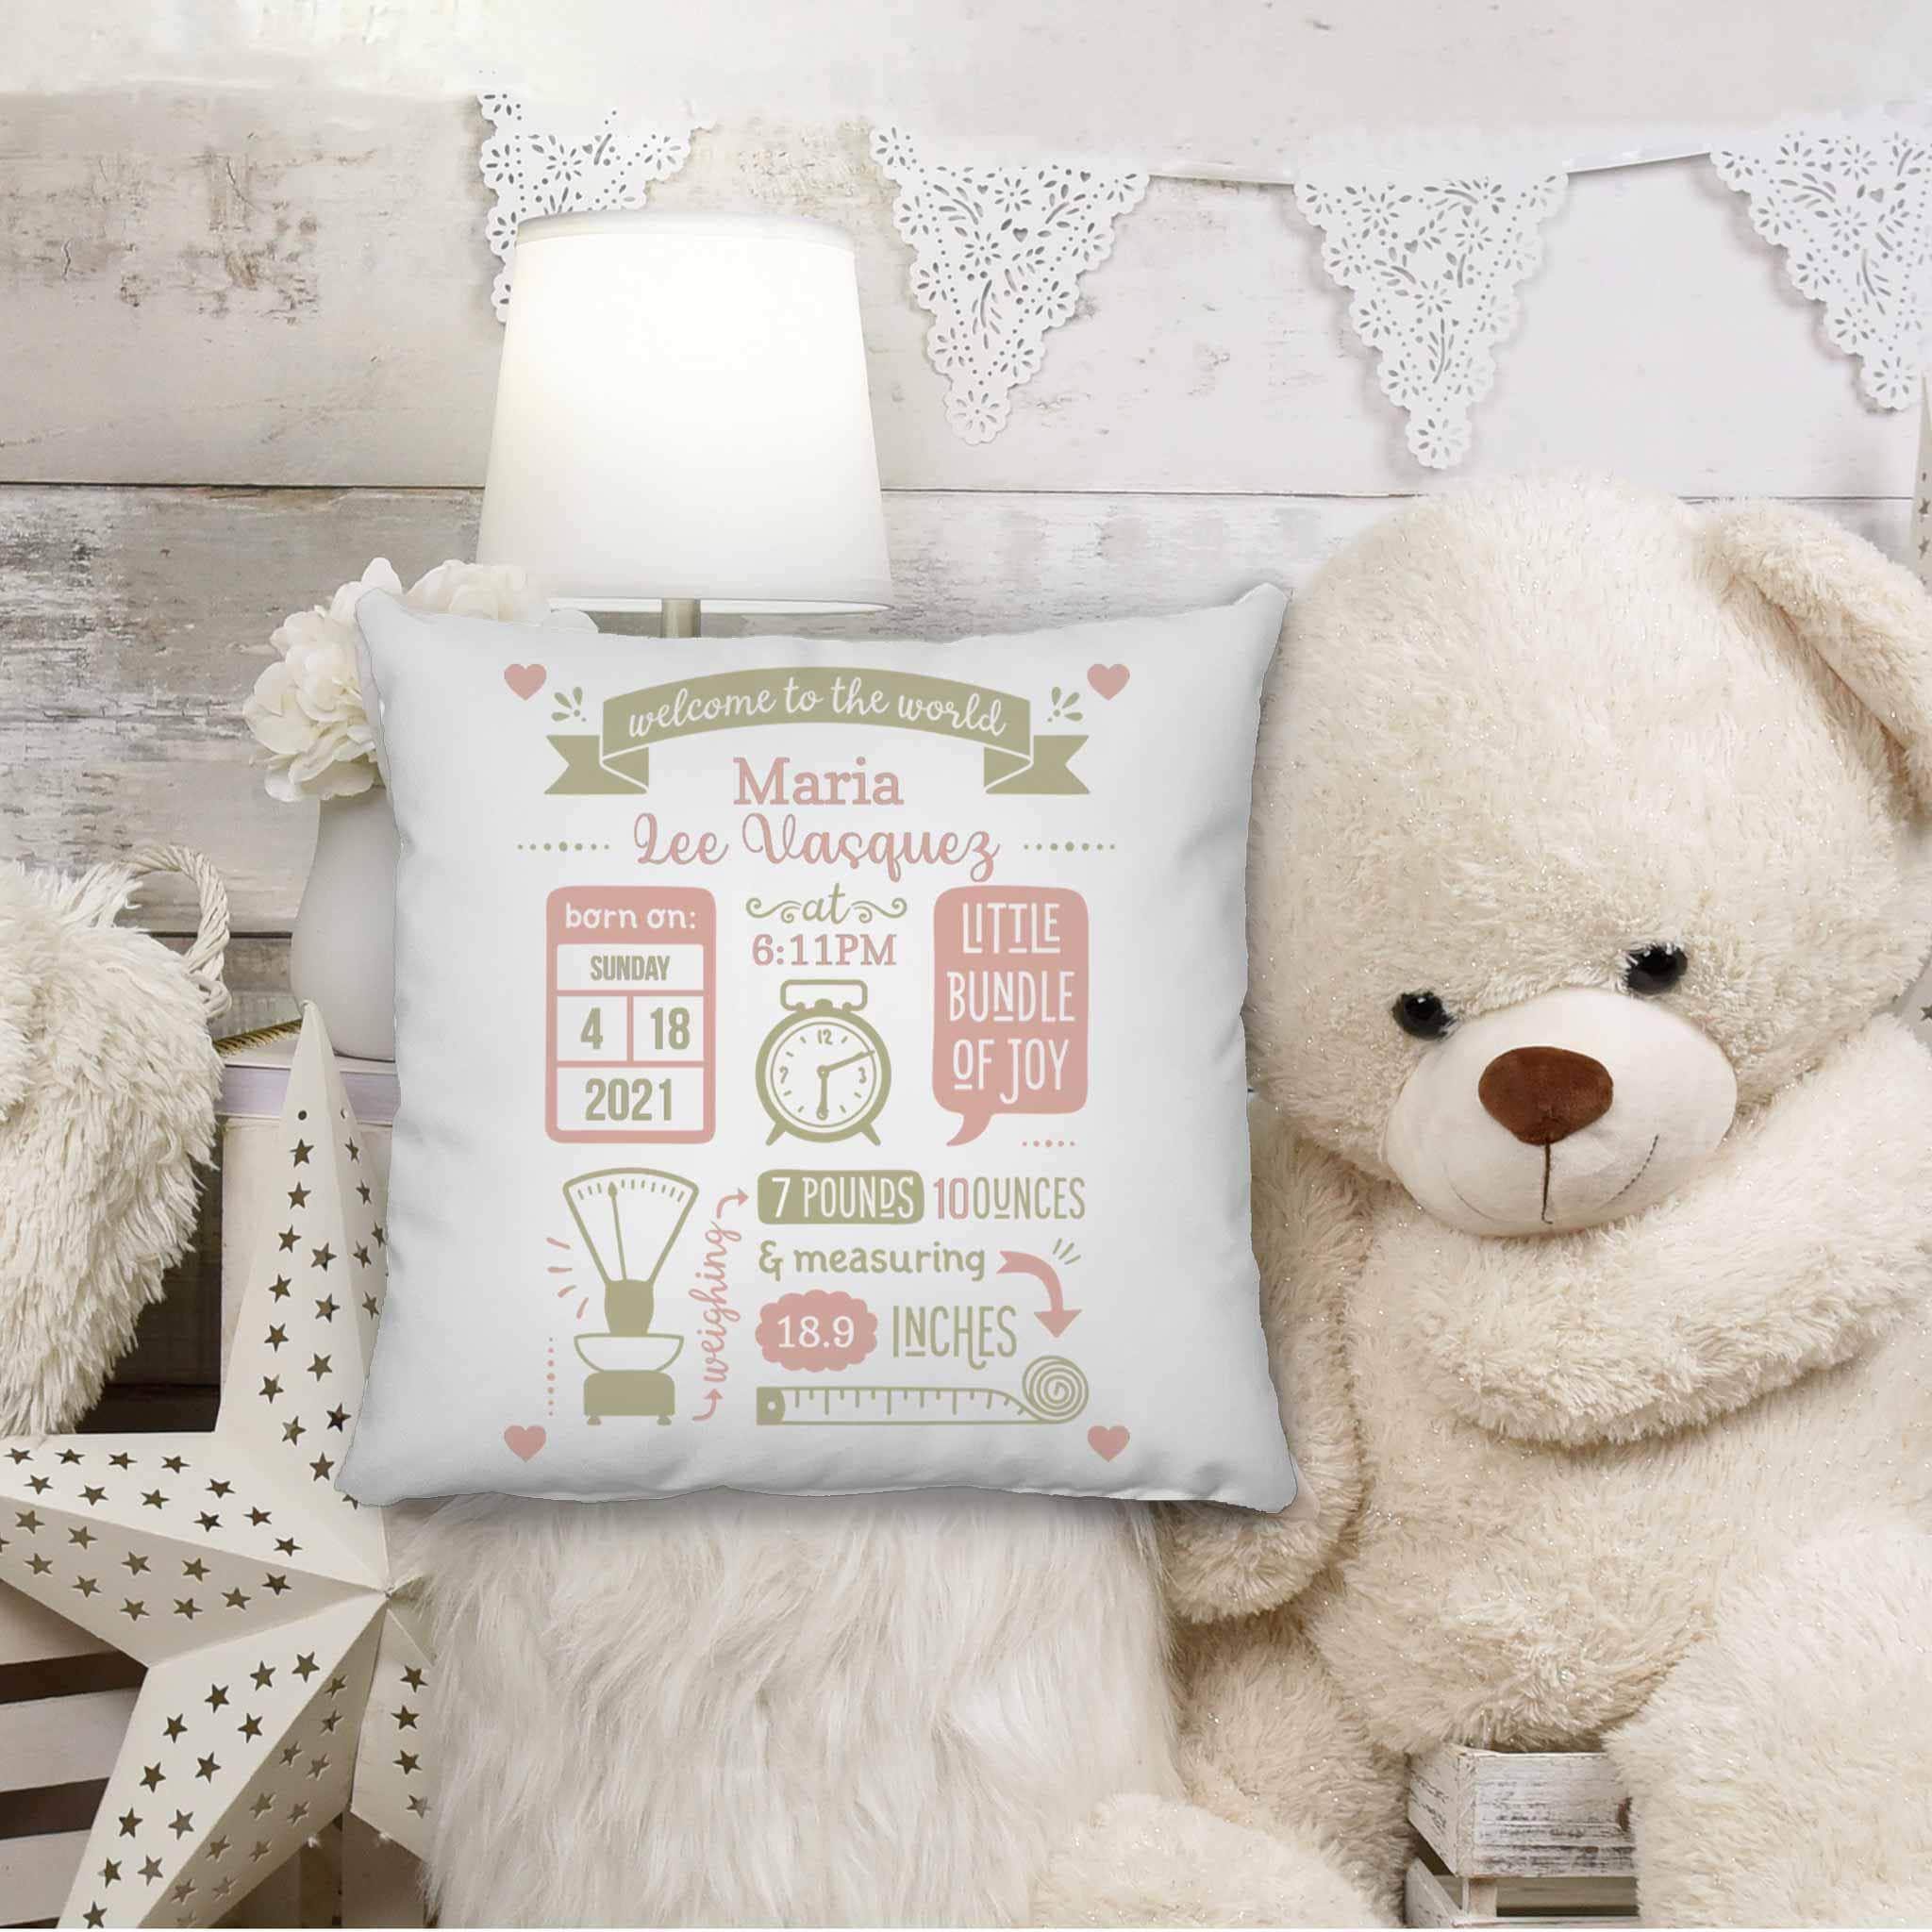 https://cdn.shopify.com/s/files/1/0267/0608/4013/products/baby-birth-stats-announcement-peach-olive-clock-scale-tape-measure-personalized-pillow-472287.jpg?v=1644633880&width=2048